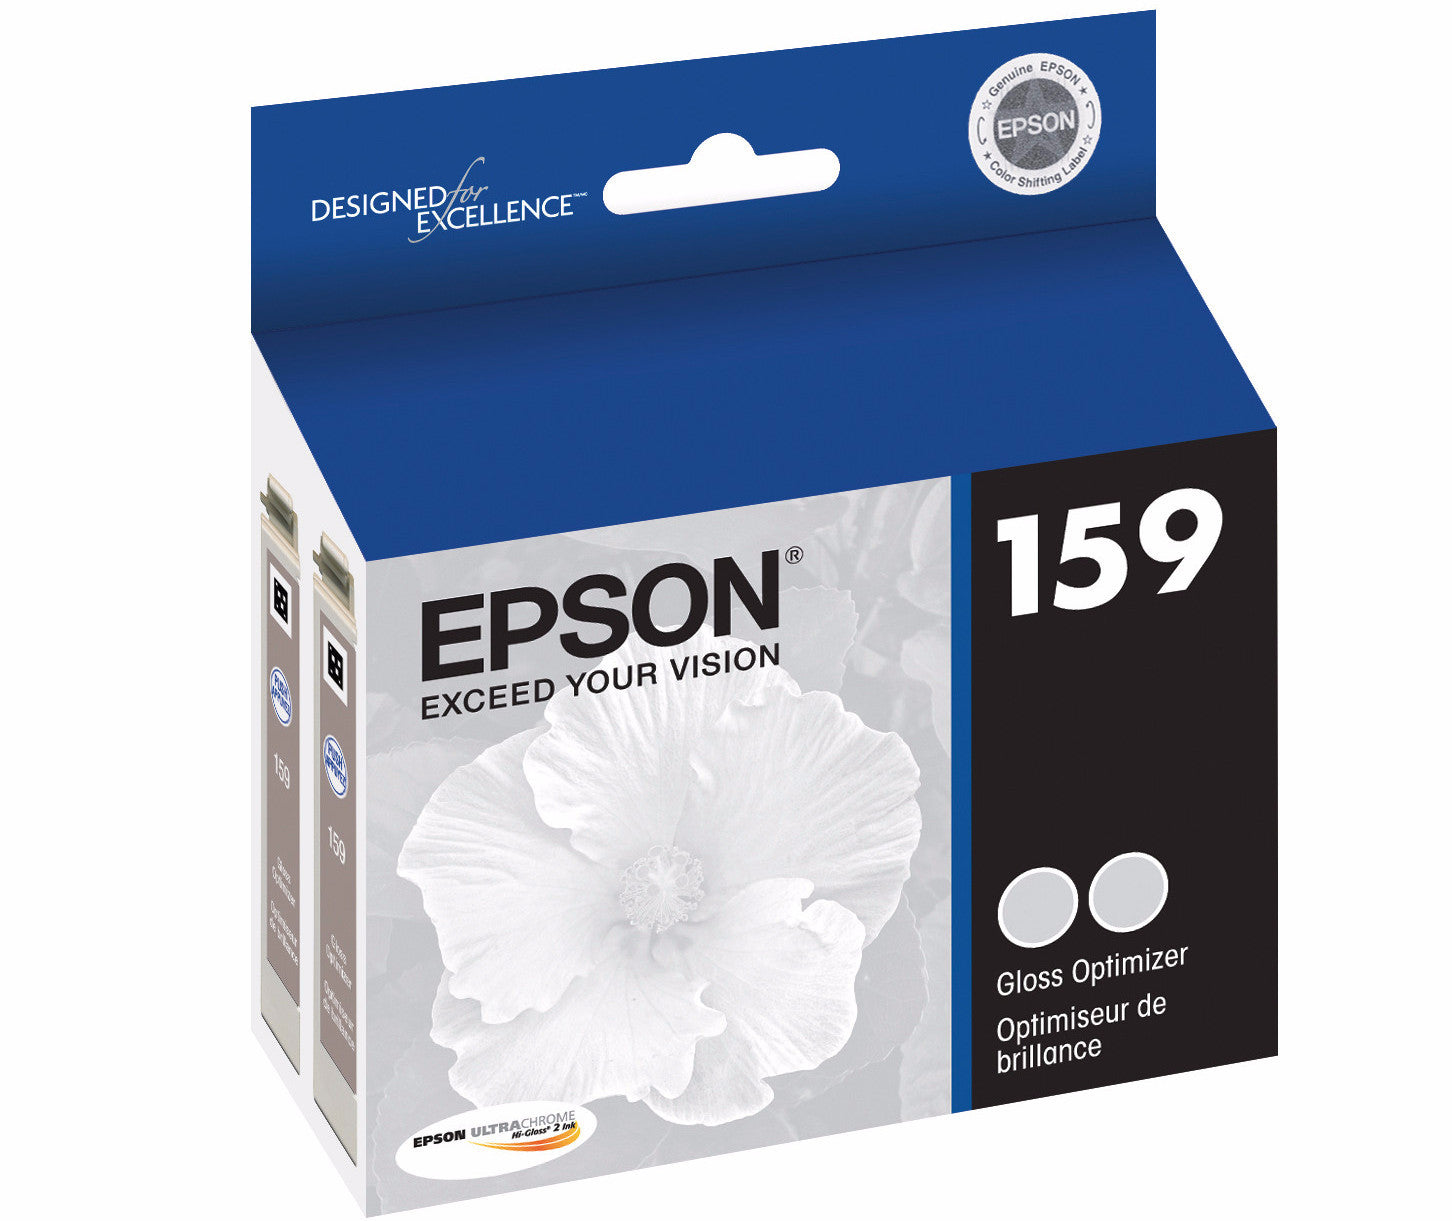 Epson T159020 R2000 Gloss Optimizer Cartridge, printers ink small format, Epson - Pictureline 